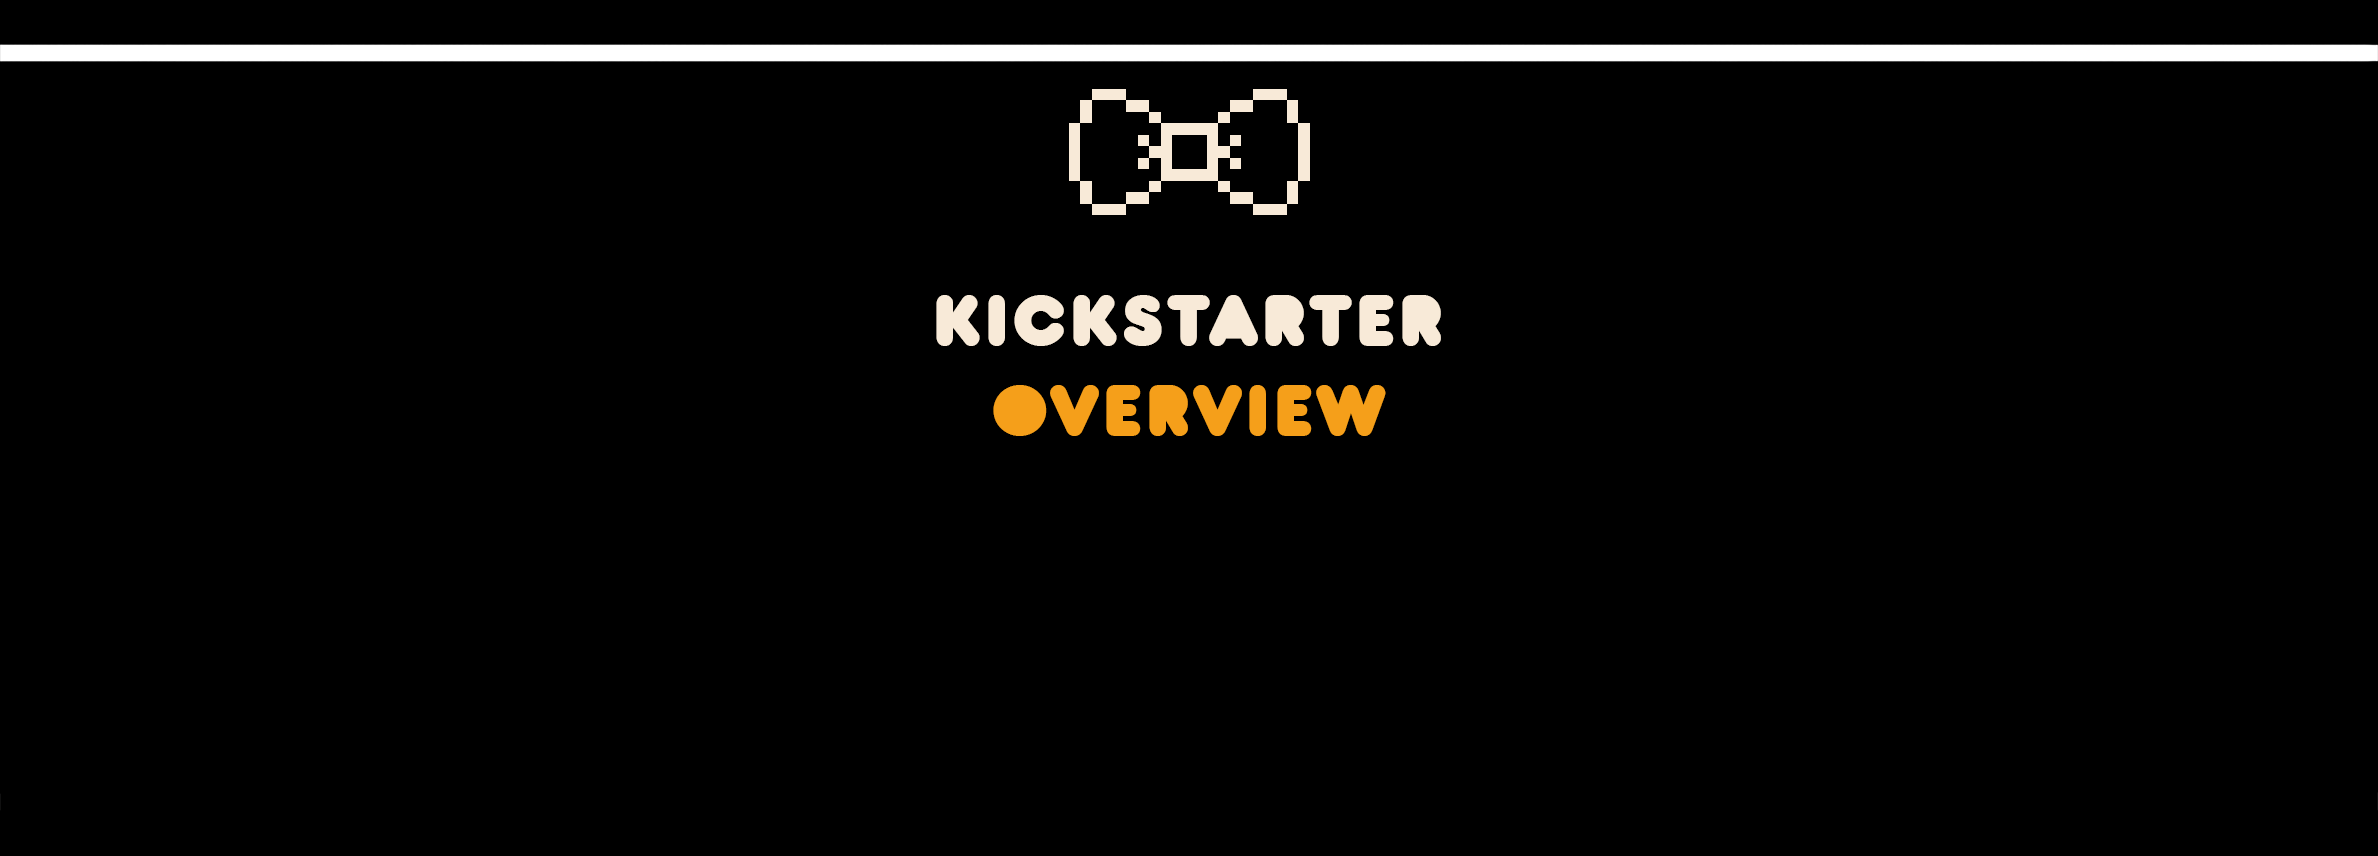 Article cover image for "Building a Prelaunch Community for Kickstarter"